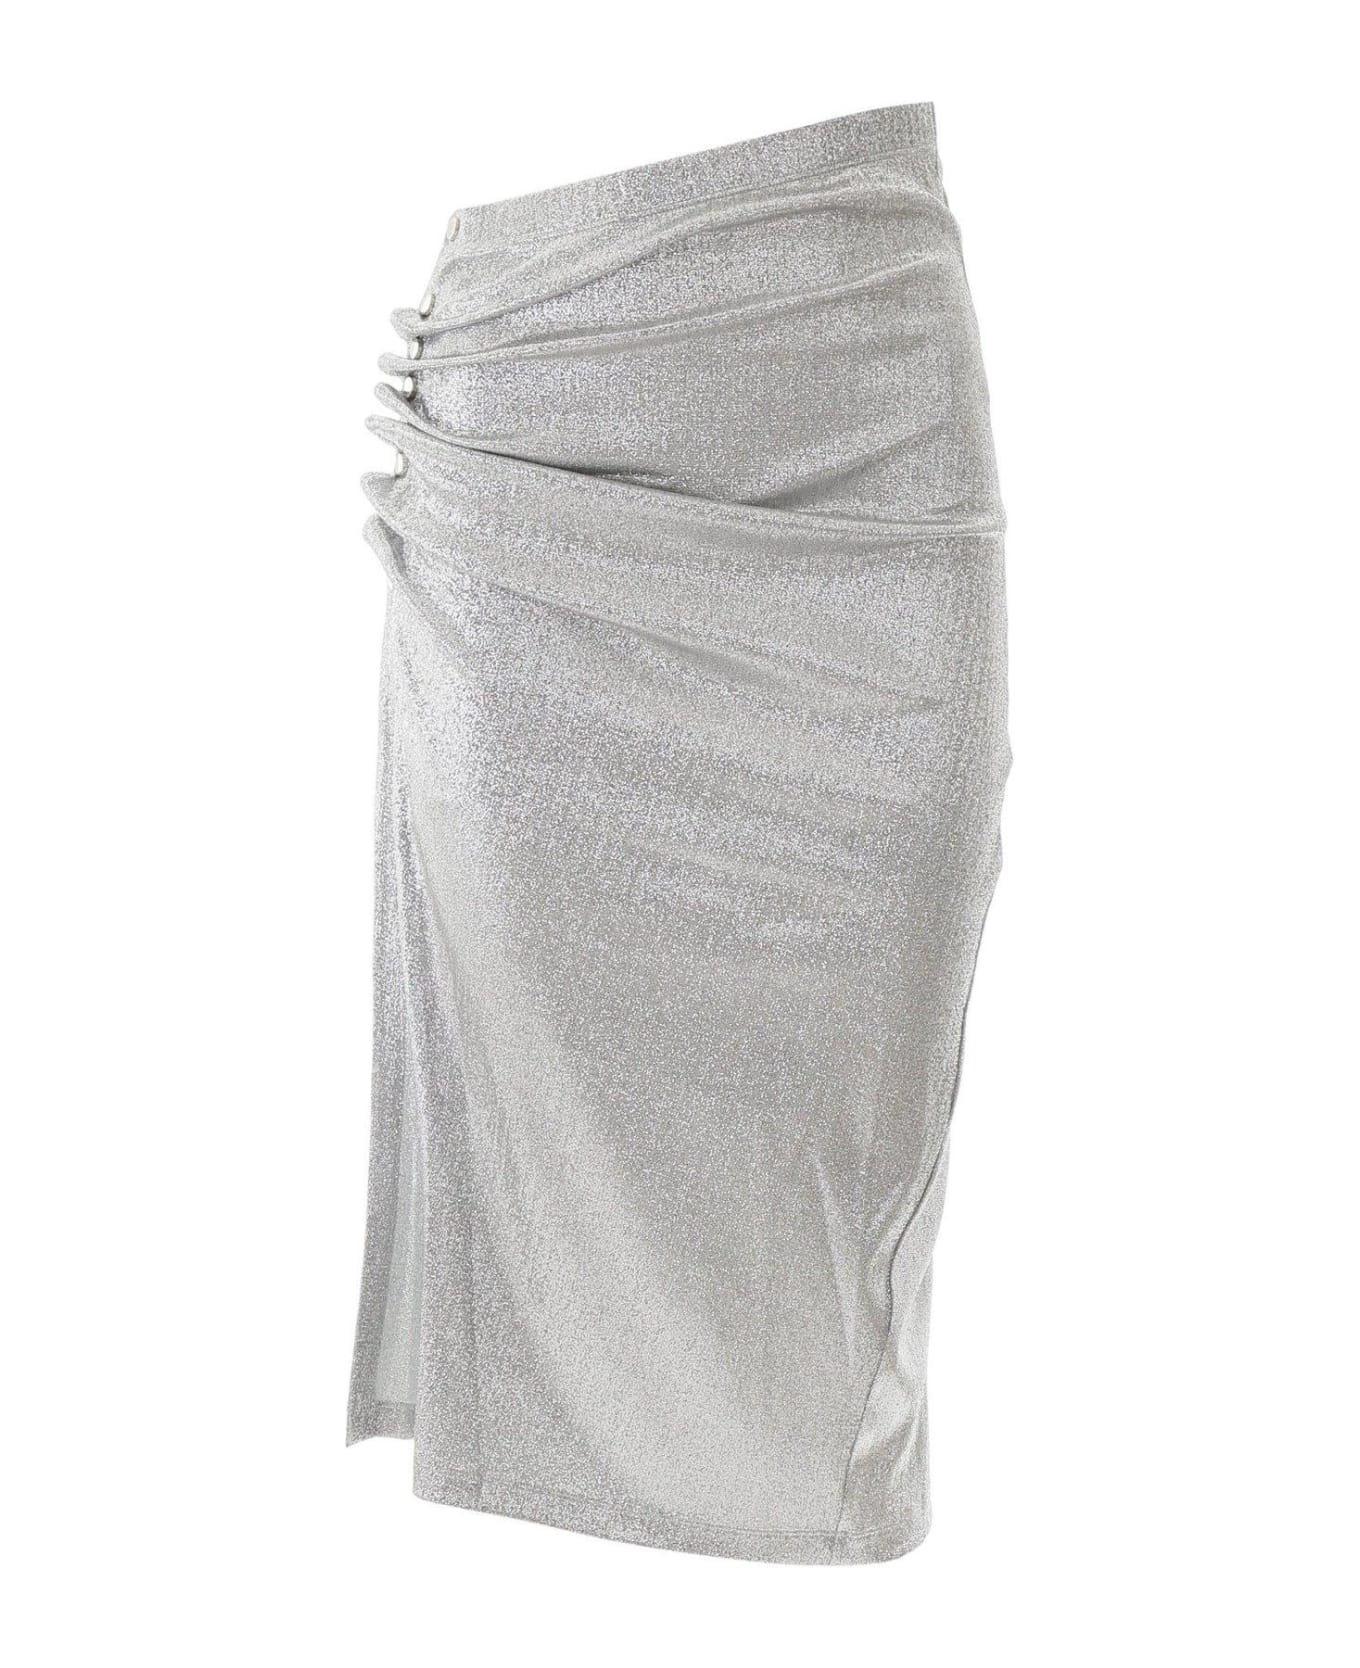 Paco Rabanne Drapped Button Skirt - Silver